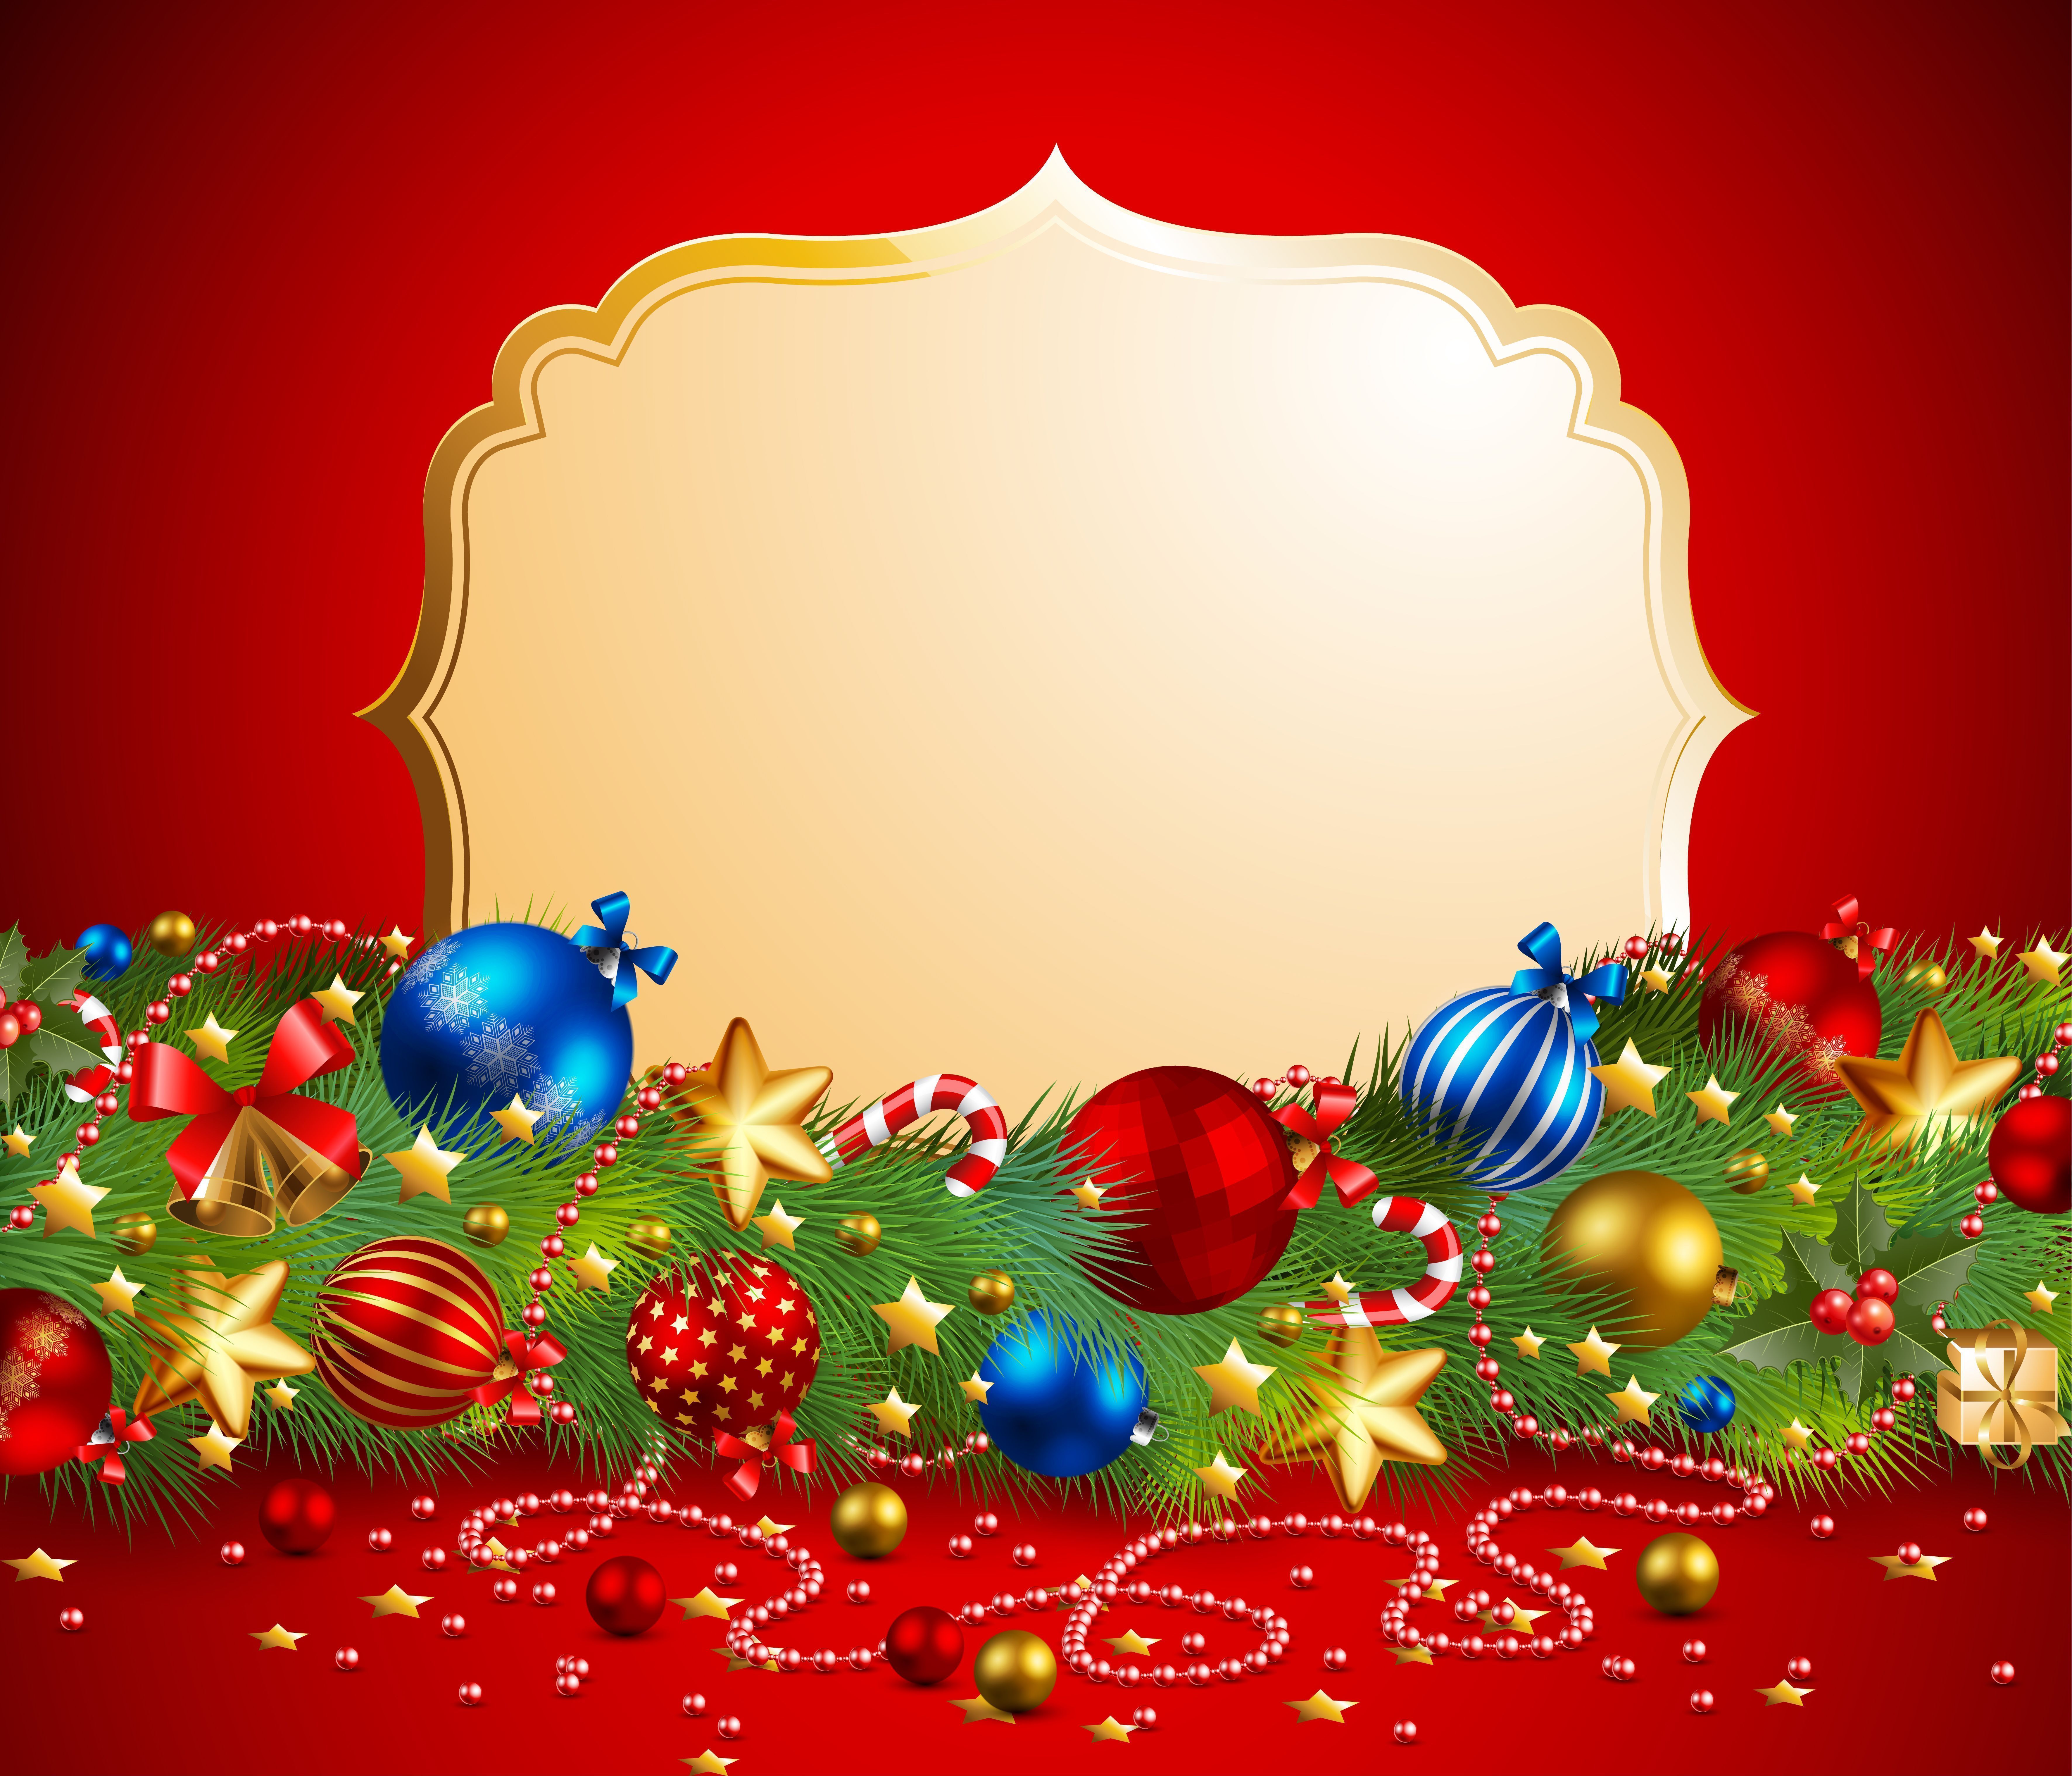 Christmas Background Free | Wallpapers9